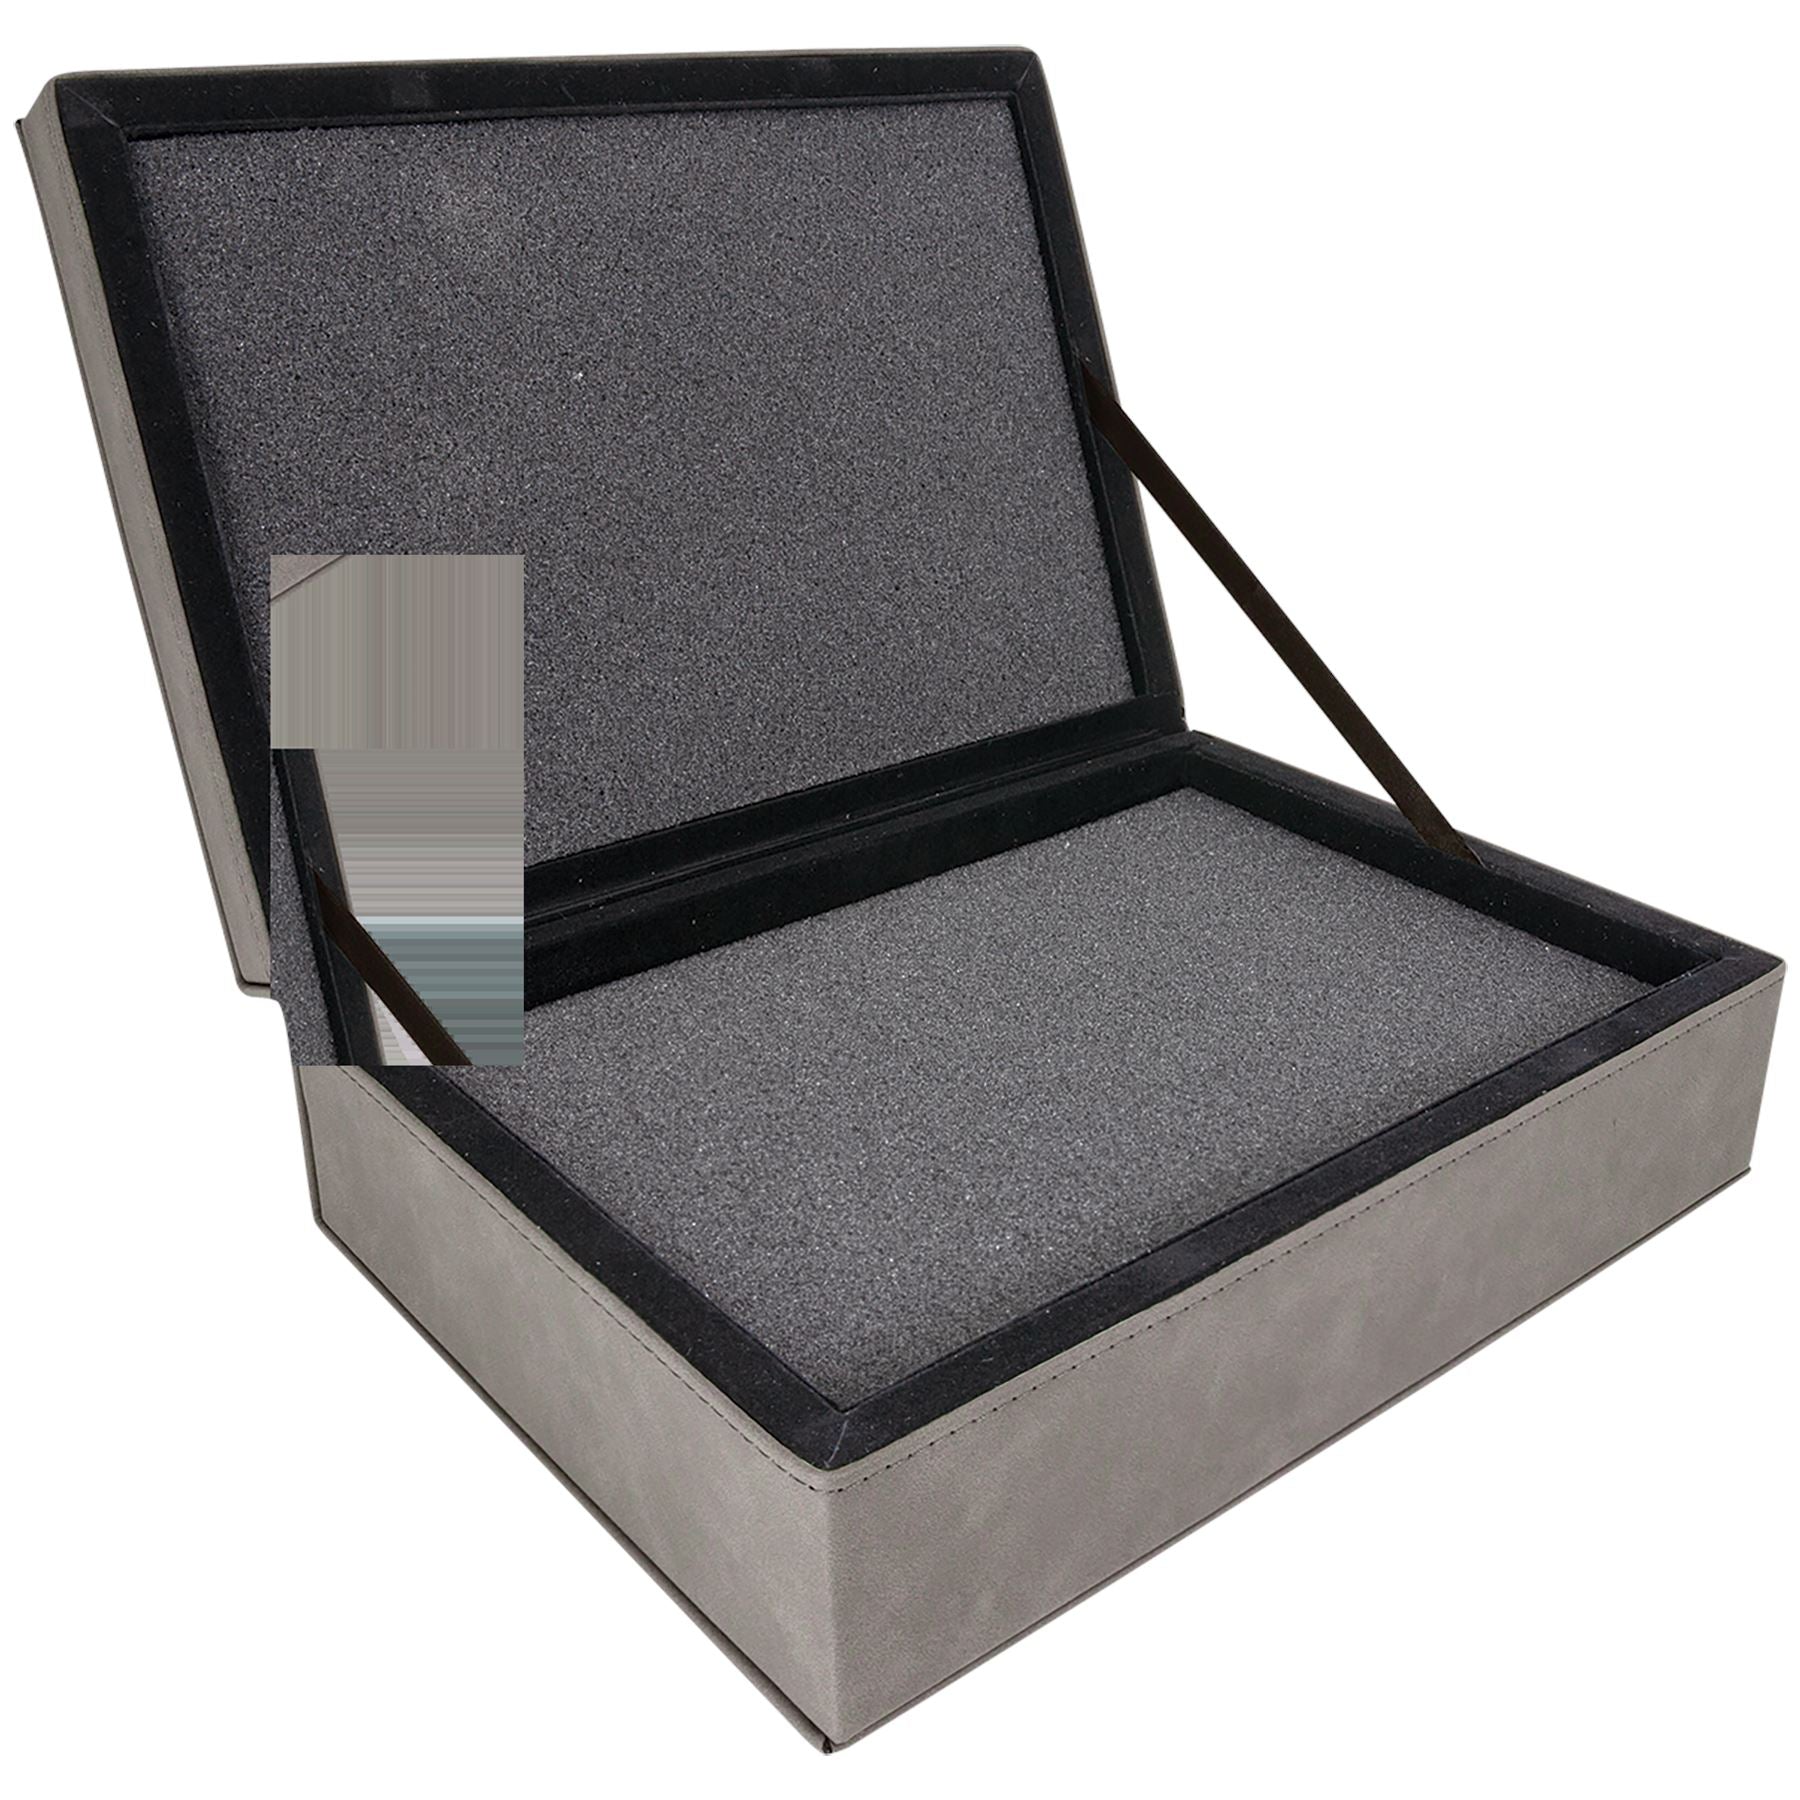 Premium Gift Box, 10 1/4" x 7 1/2" Laserable Leatherette Gift Box Craftworks NW 